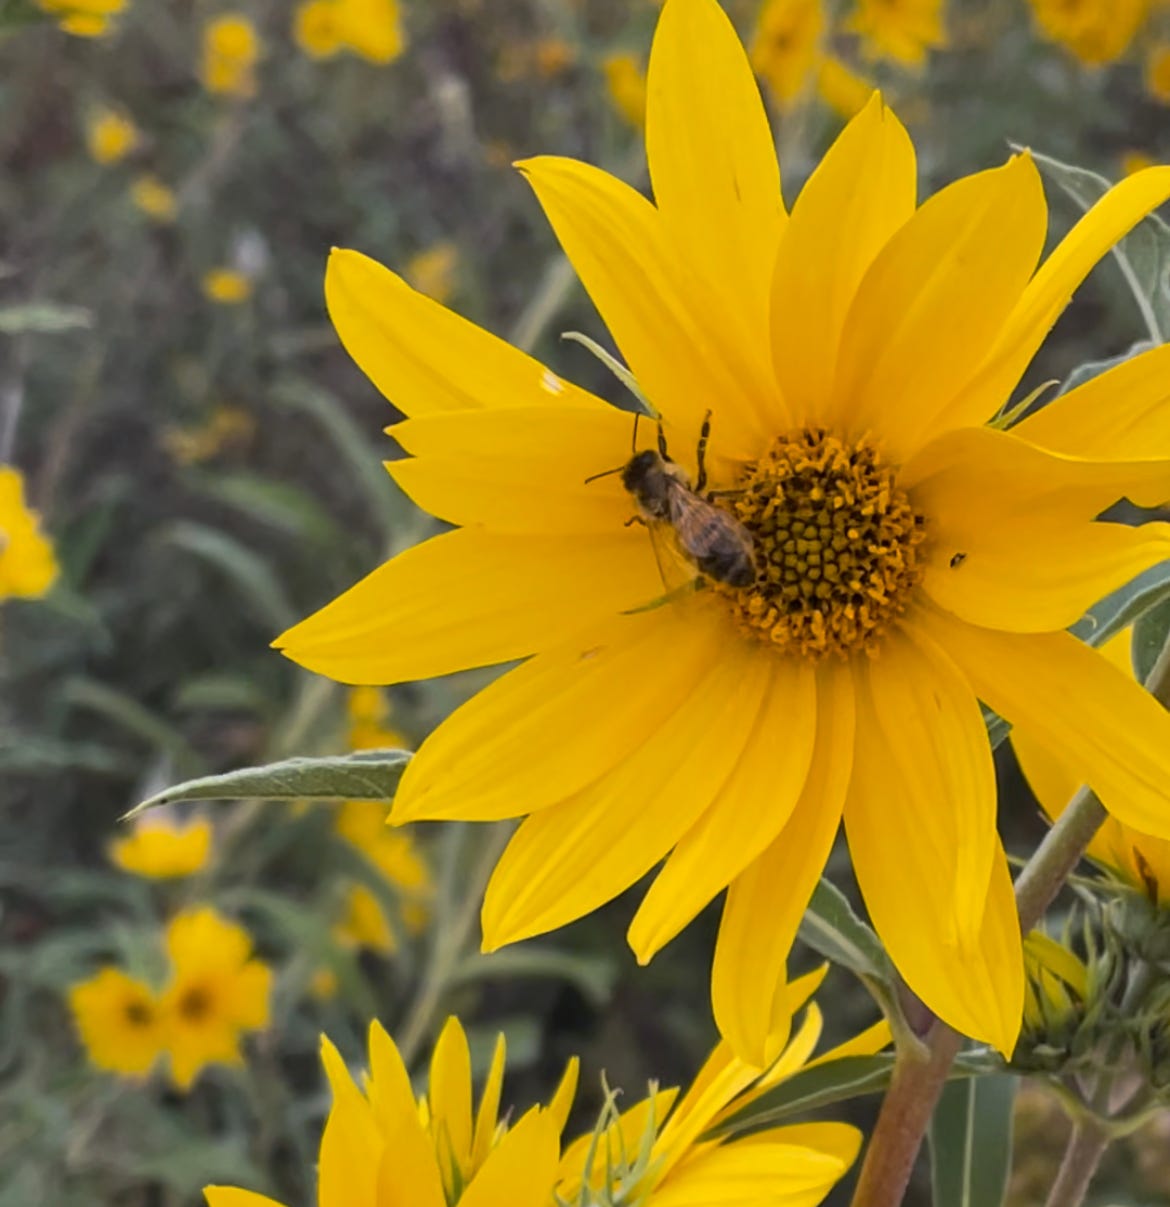 A close-up shot of a yellow wildflower with a bee pollinating it.